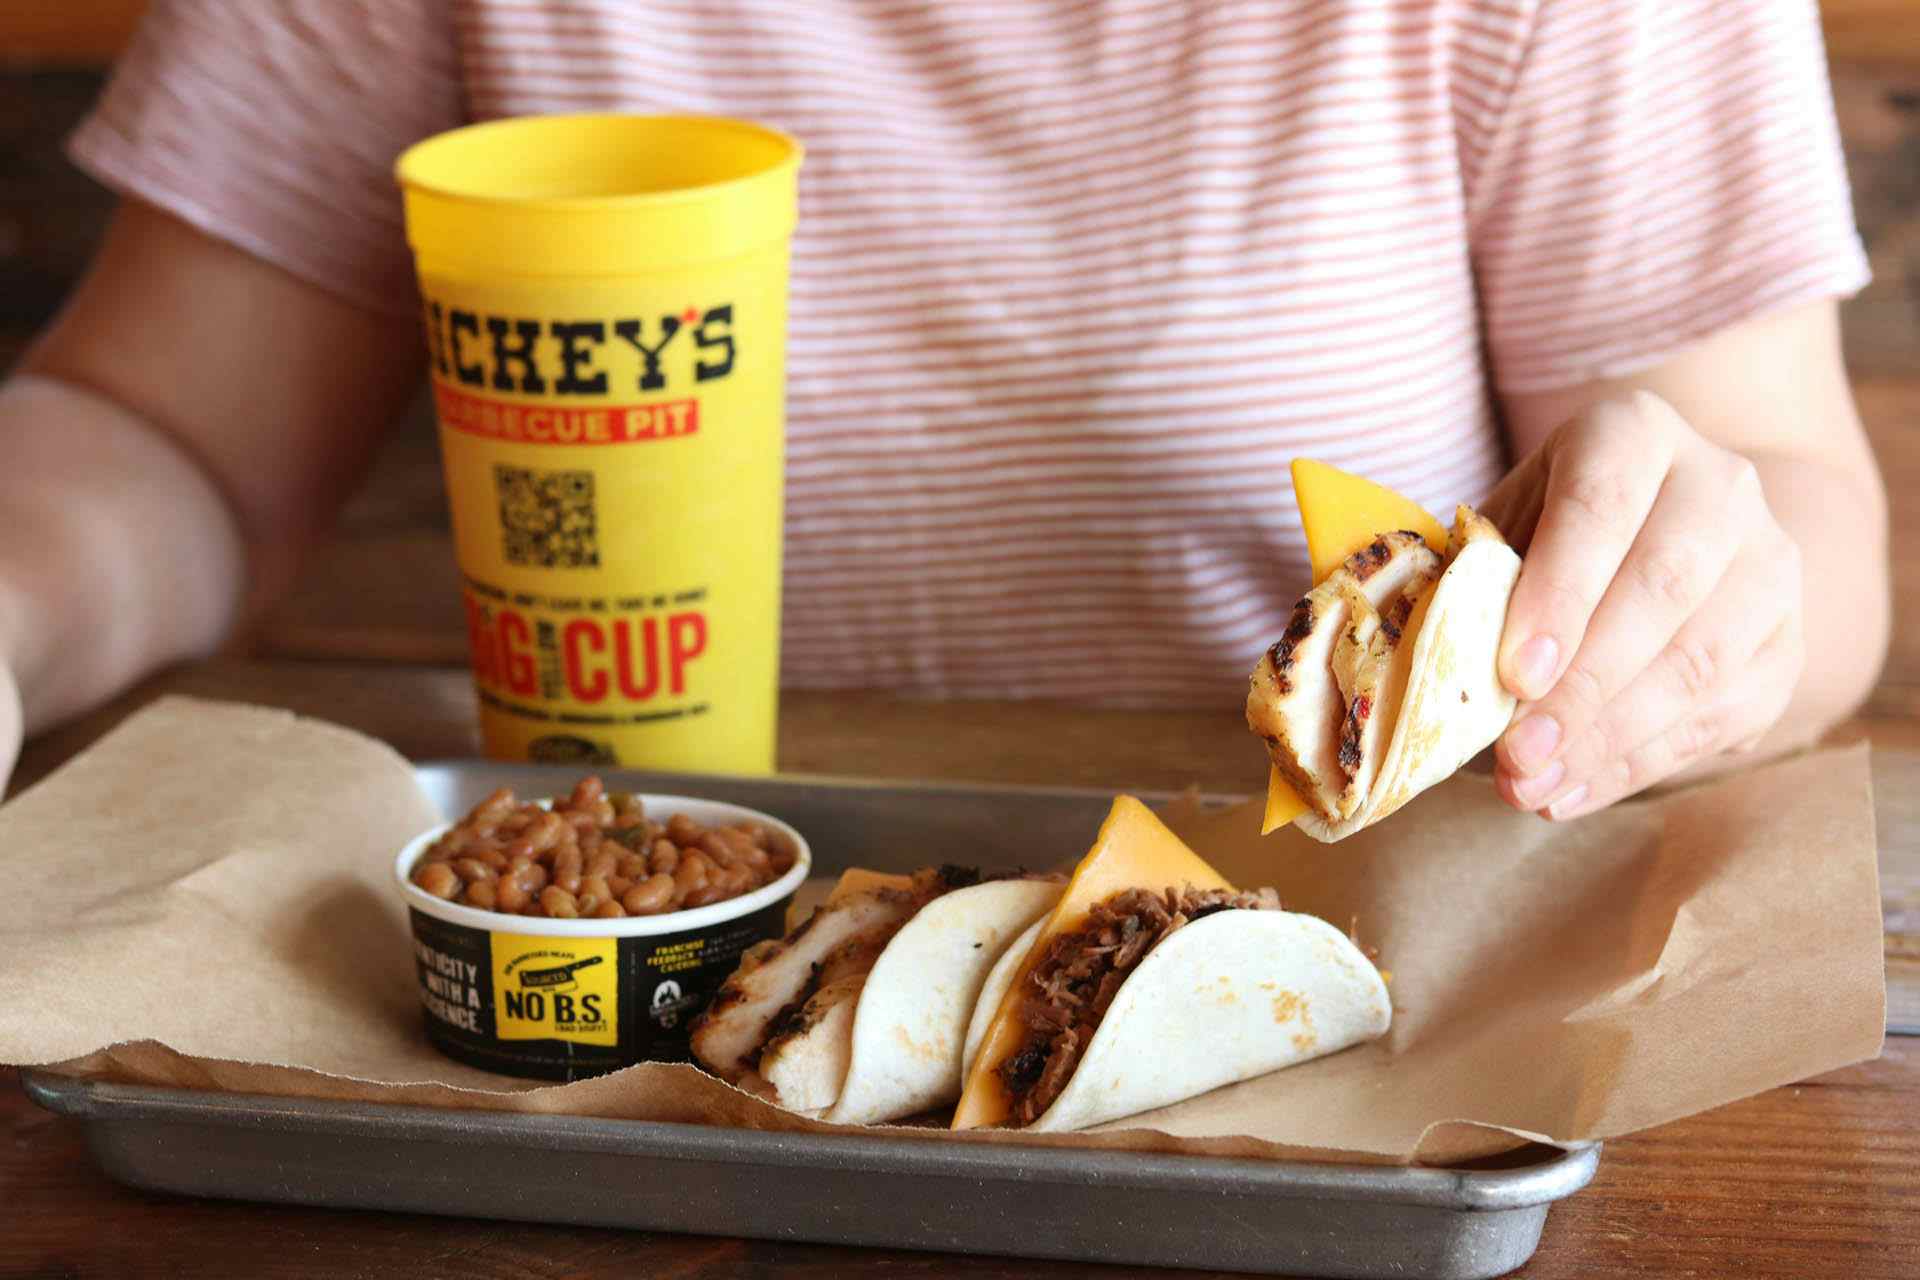 Local Family Brings Dickey’s Barbecue Pit to Falls City